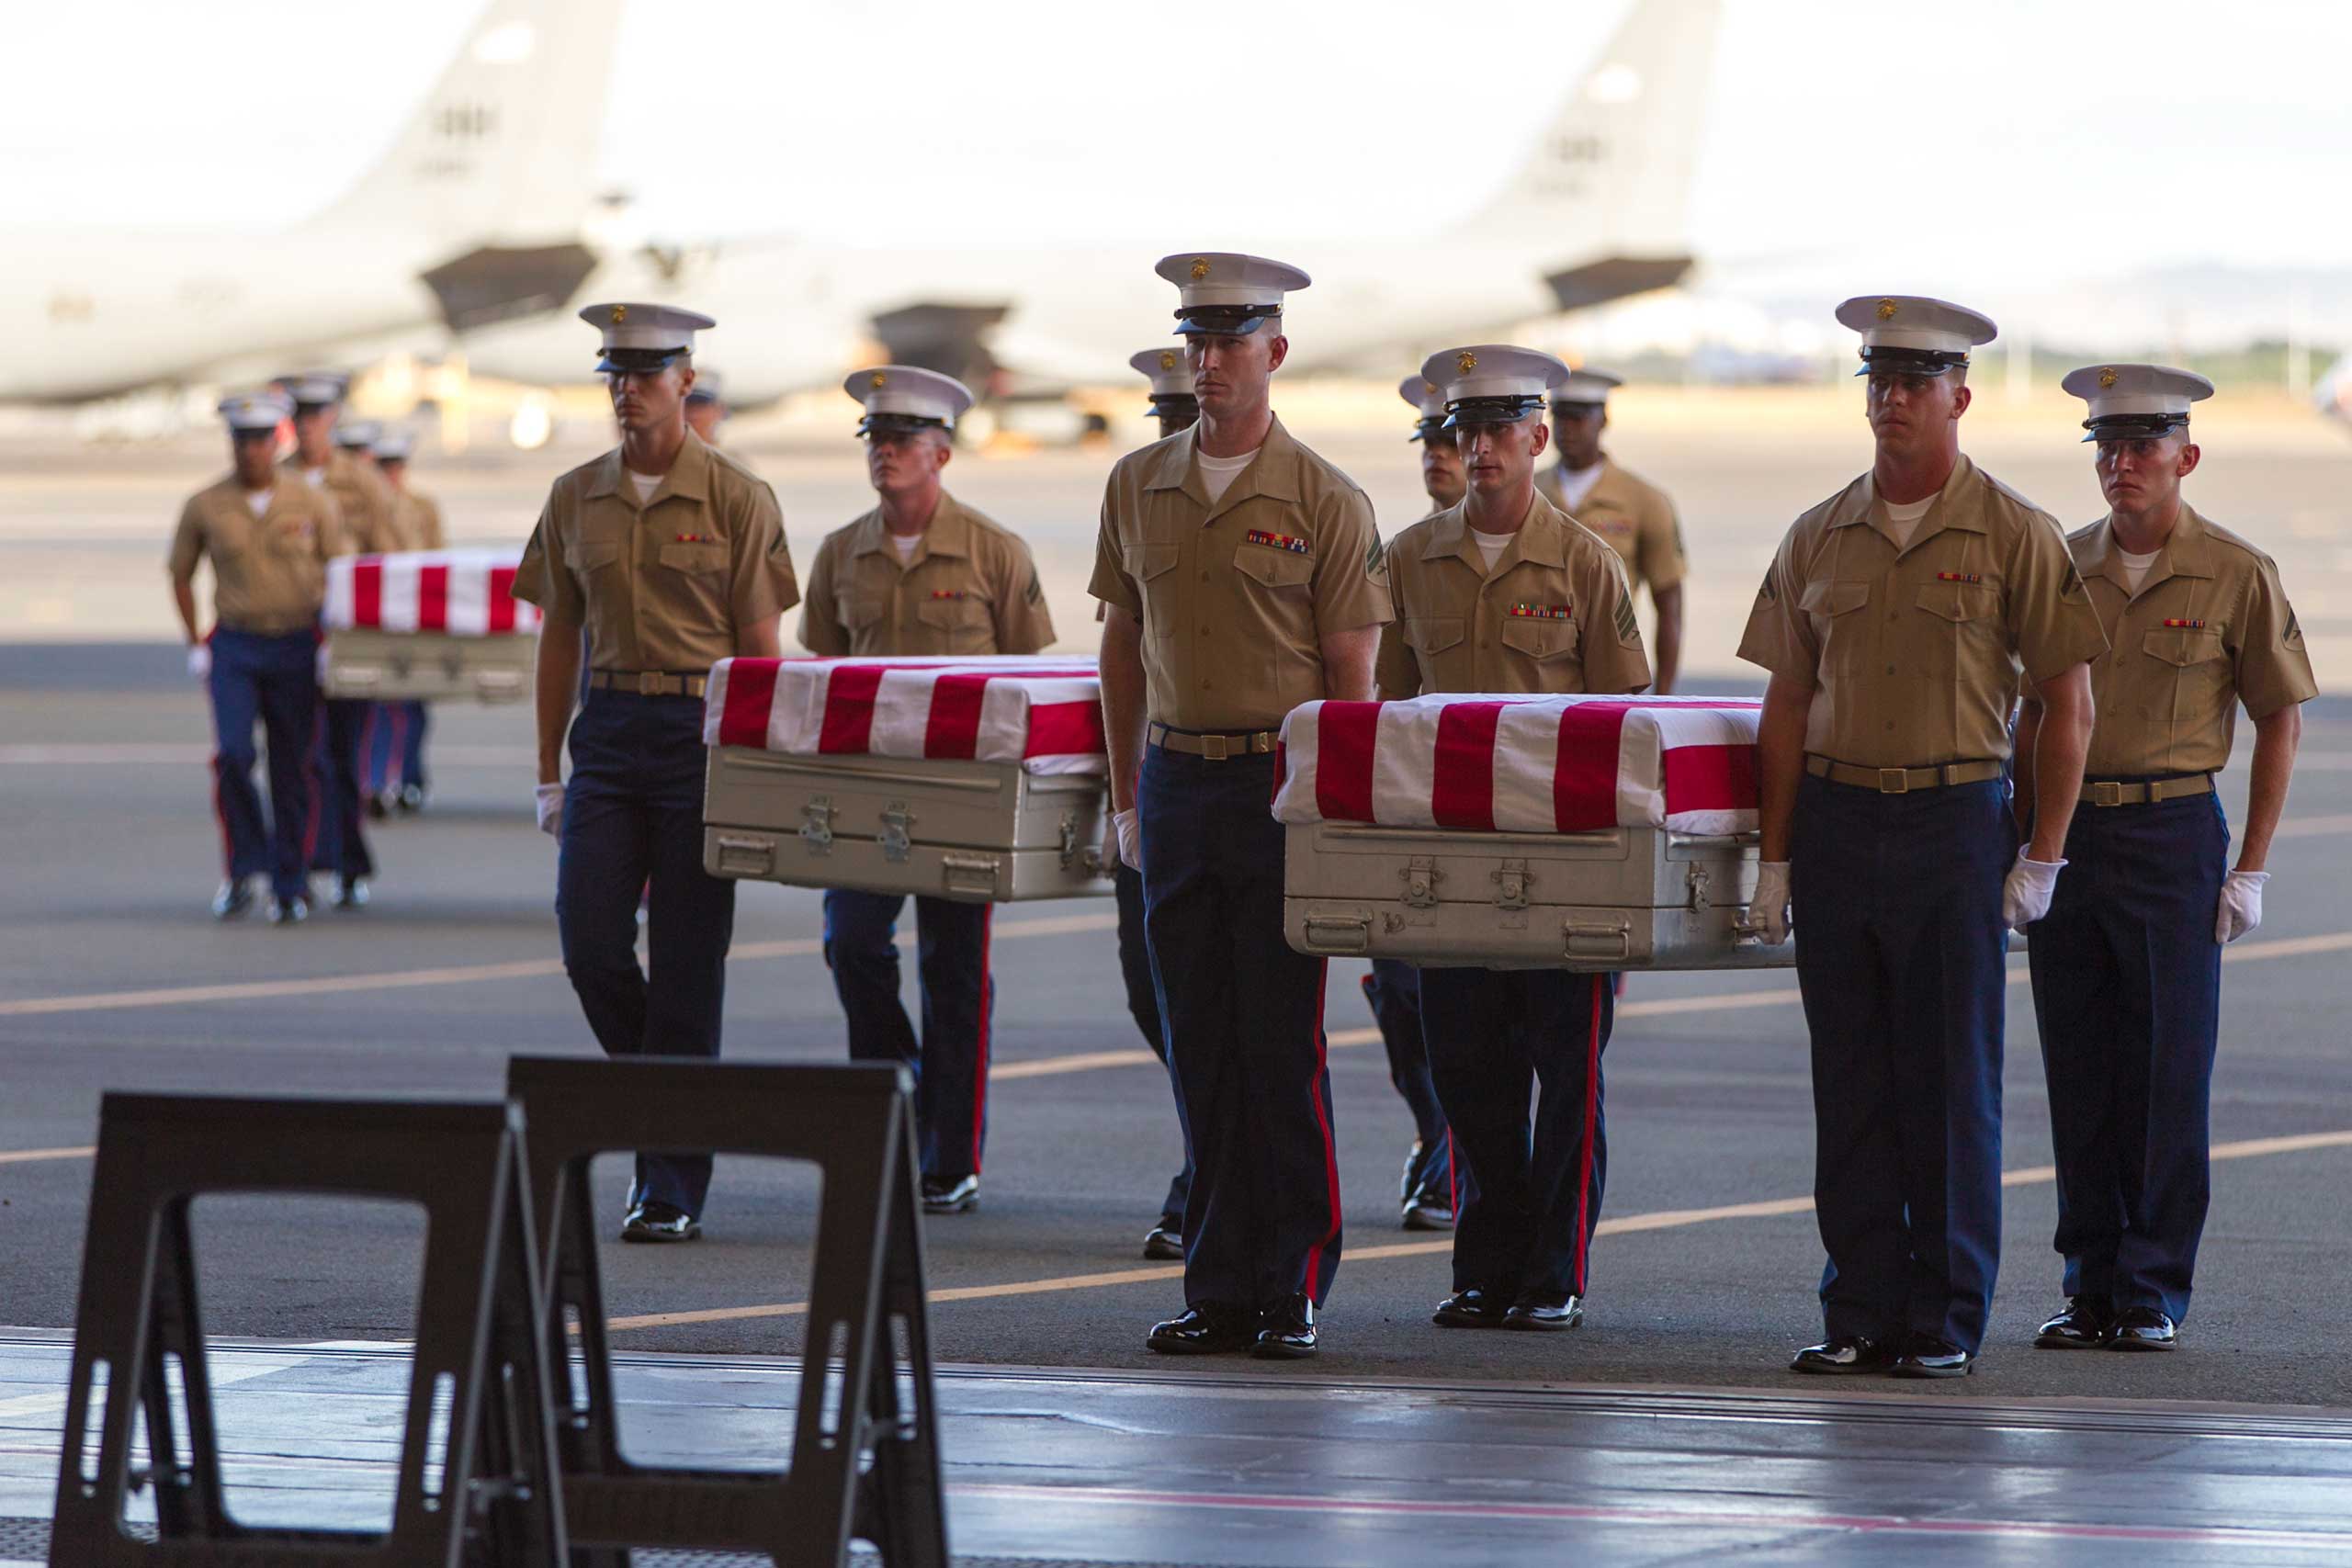 U.S. Marines carry the remains of 36 unidentified Marines found at a World War II battlefield during a ceremony at Joint Base Pearl Harbor-Hickam, July 26, 2015, in Honolulu. (Marco Garcia—AP)